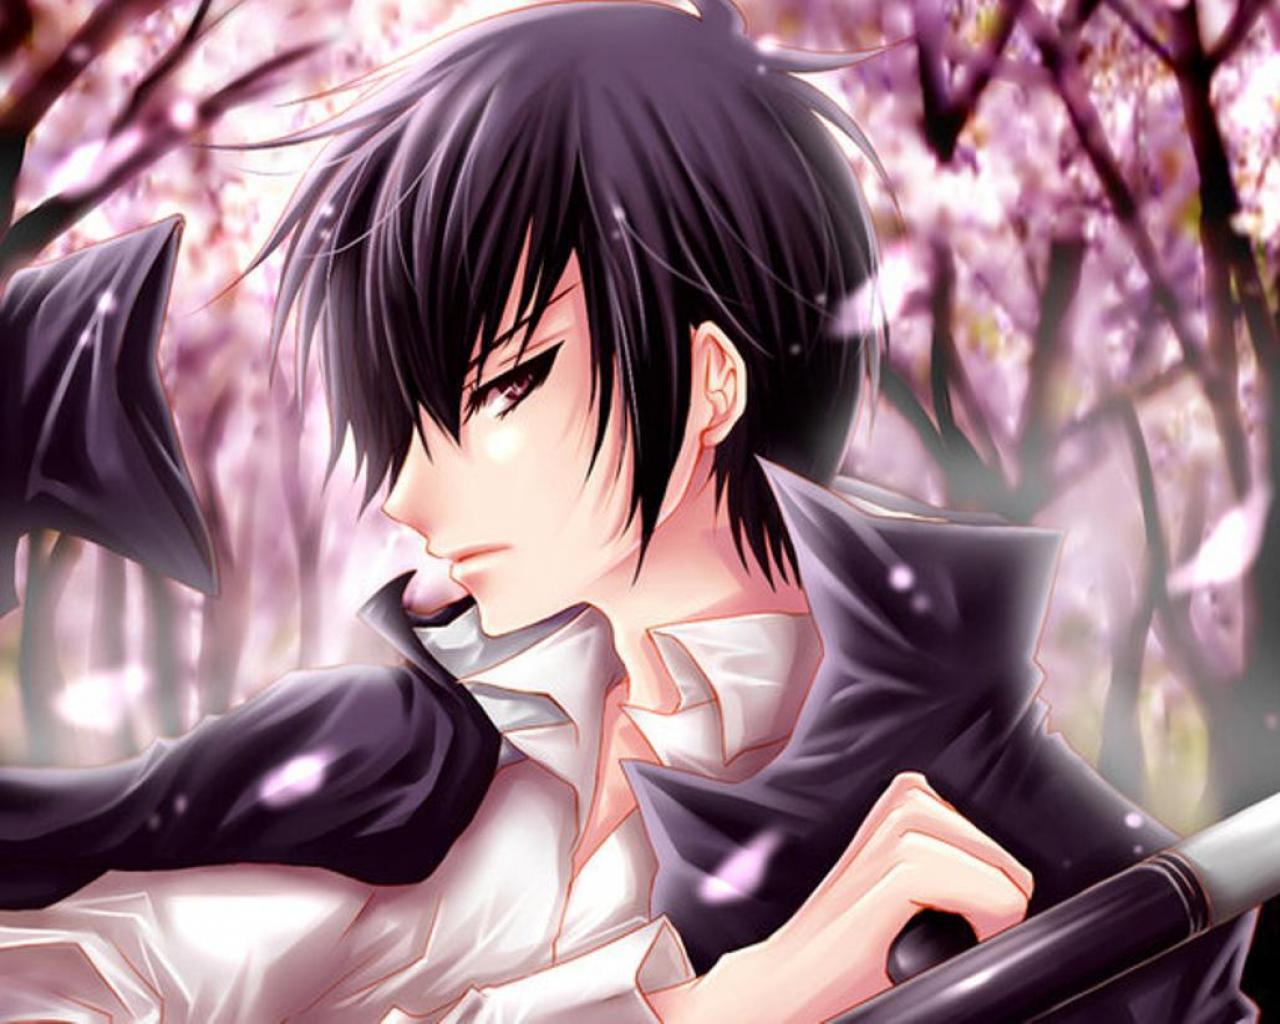 Vy2  Handsome Anime Guys Wallpapers and Images  Desktop Nexus Groups